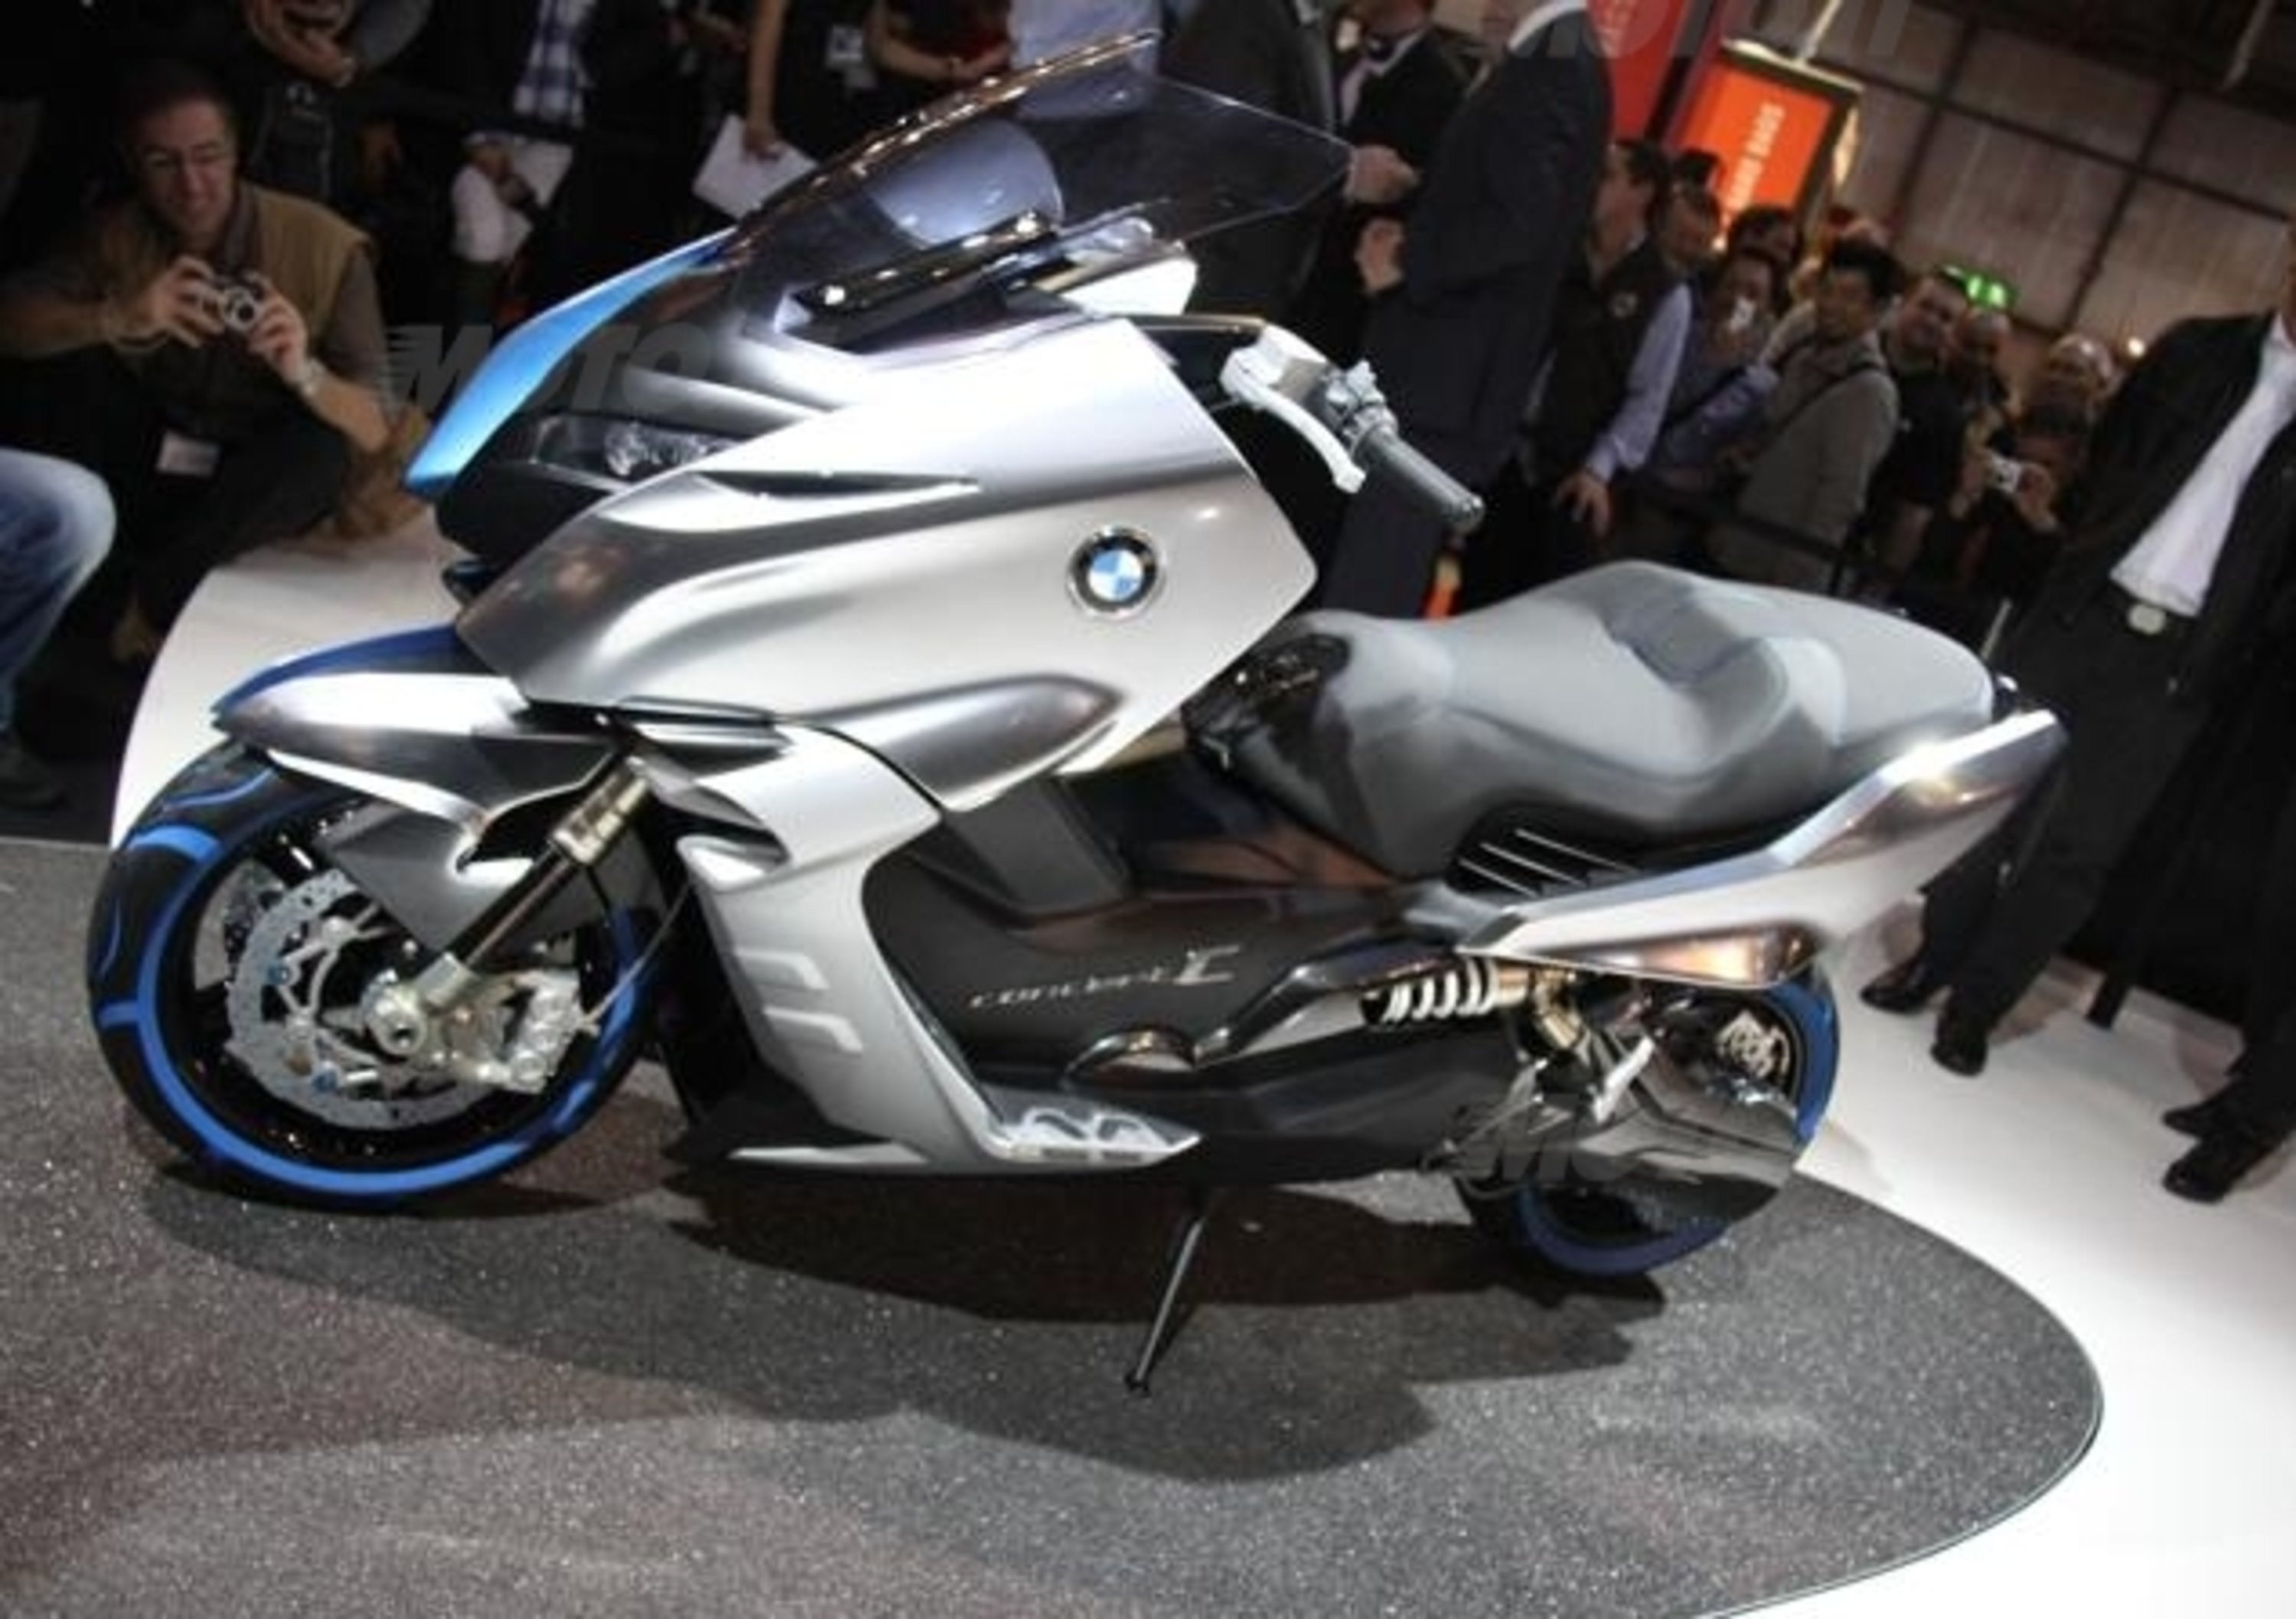 A Milano BMW introduce lo scooter Concept C